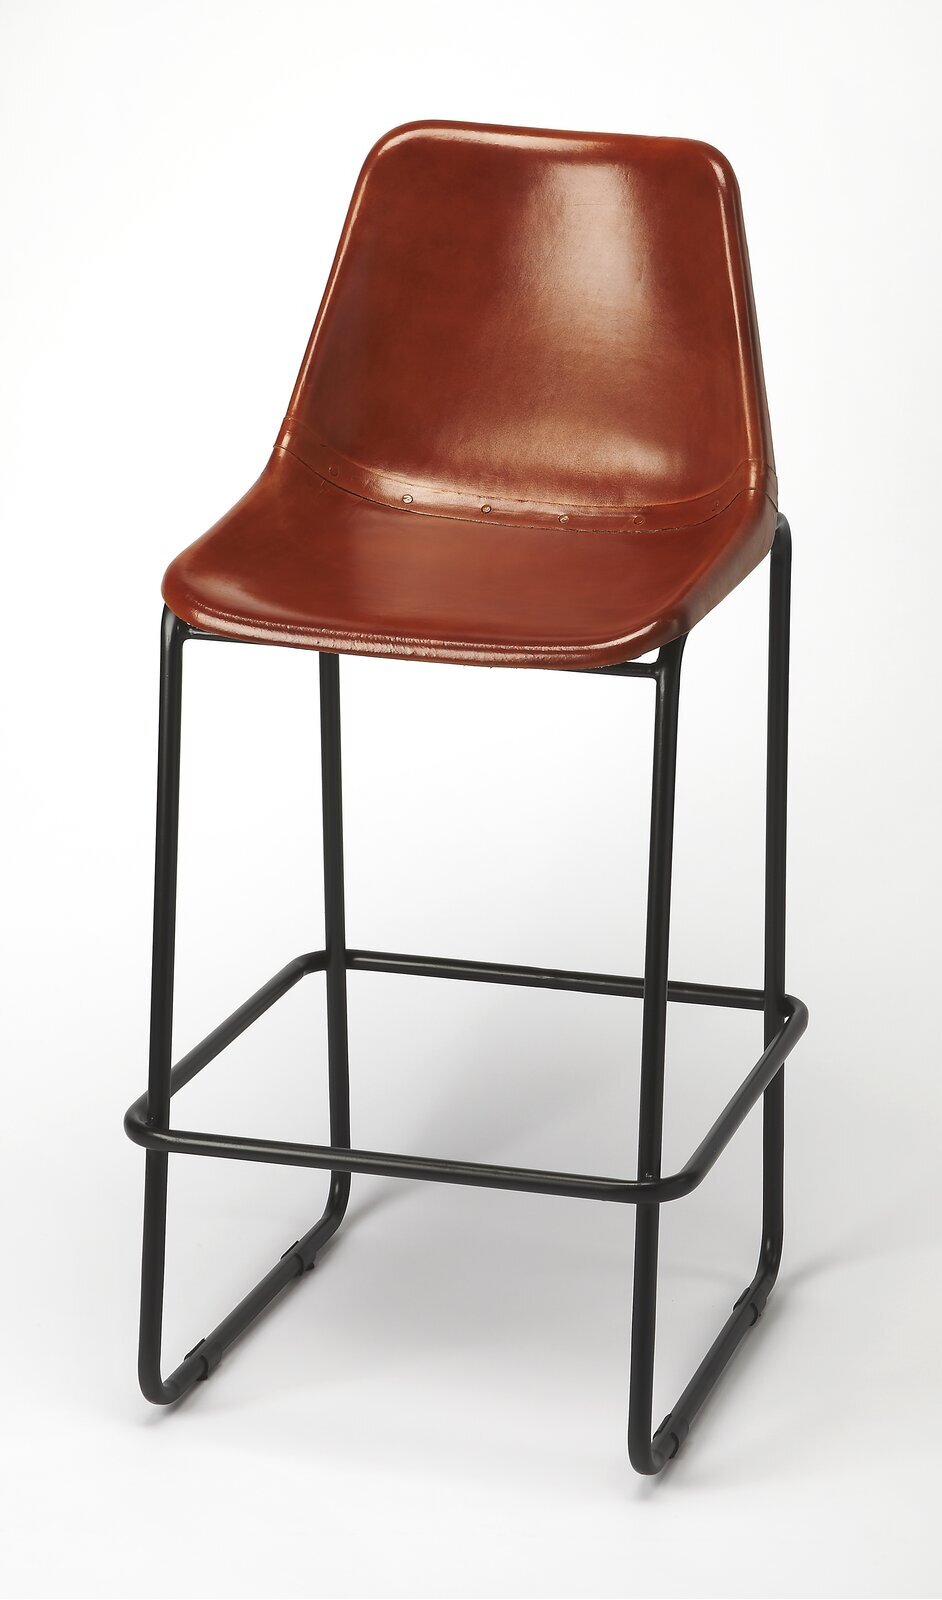 Luxurious Bar Stools with Genuine Leather Bucket Seats